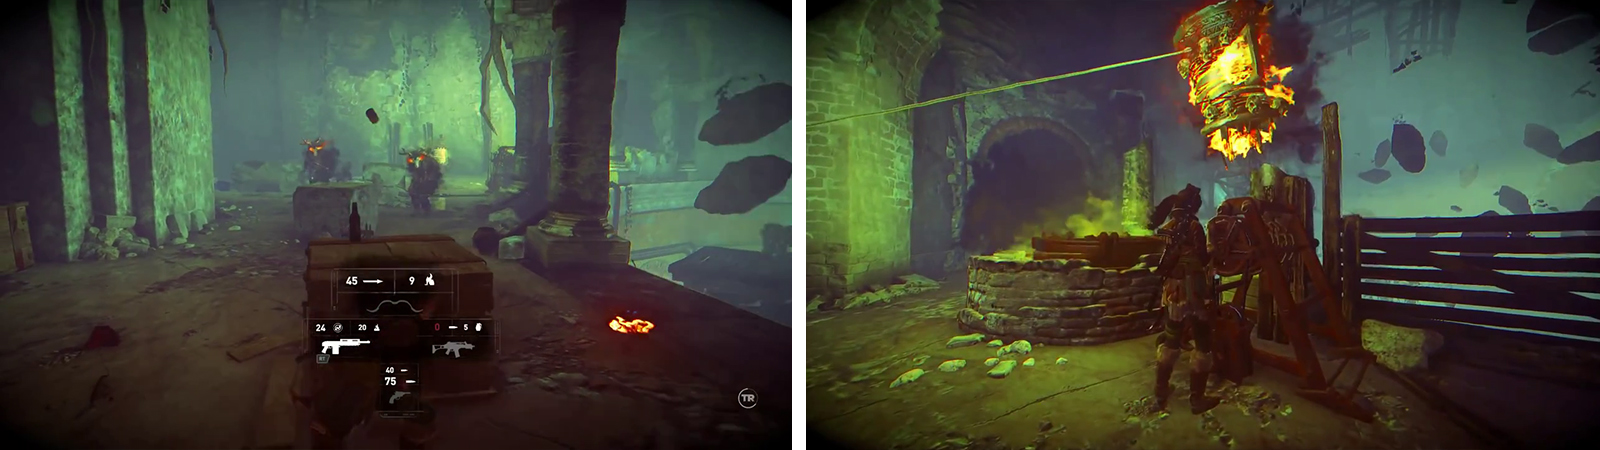 Fight through the last wave of enemies (left) before damaging the with using an explosive vat one last time (right).